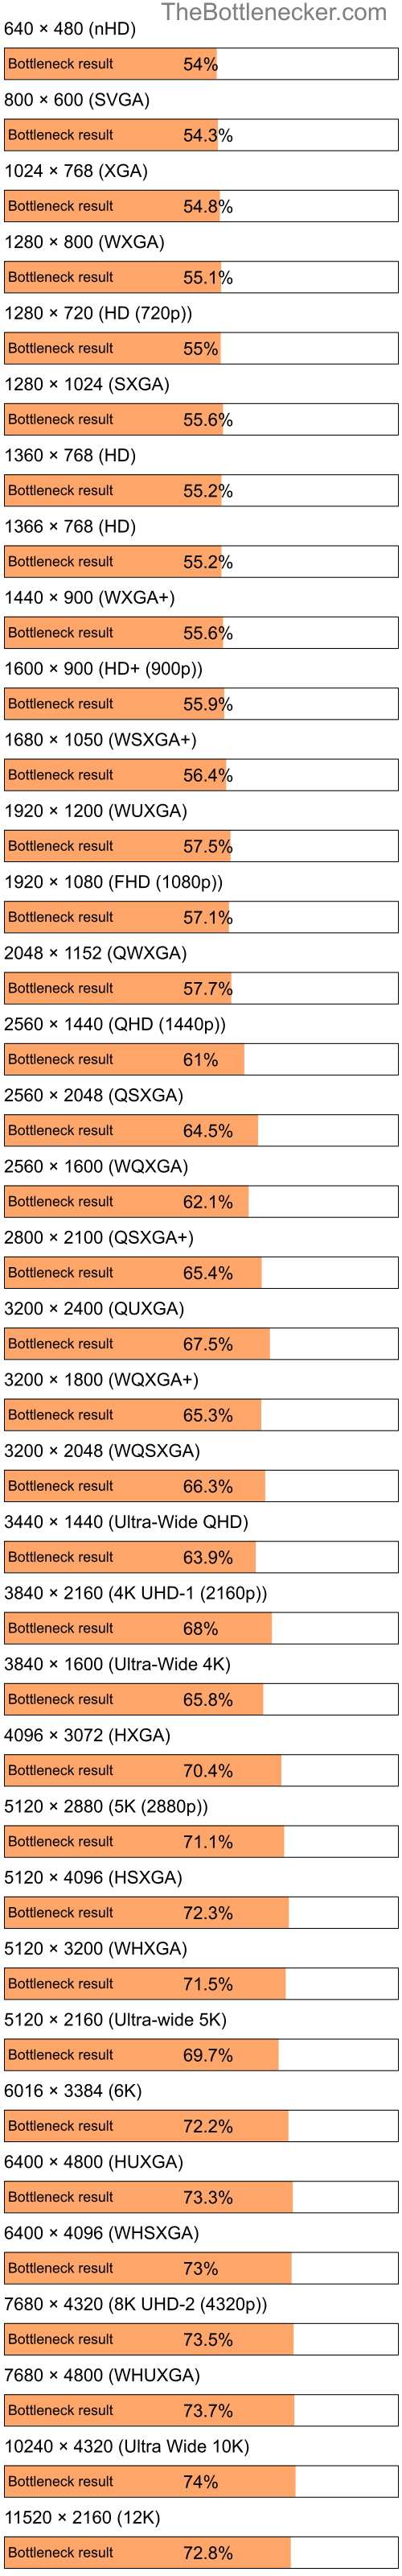 Bottleneck results by resolution for Intel Celeron M and AMD M880G with Mobility Radeon HD 4200 in Processor Intense Tasks